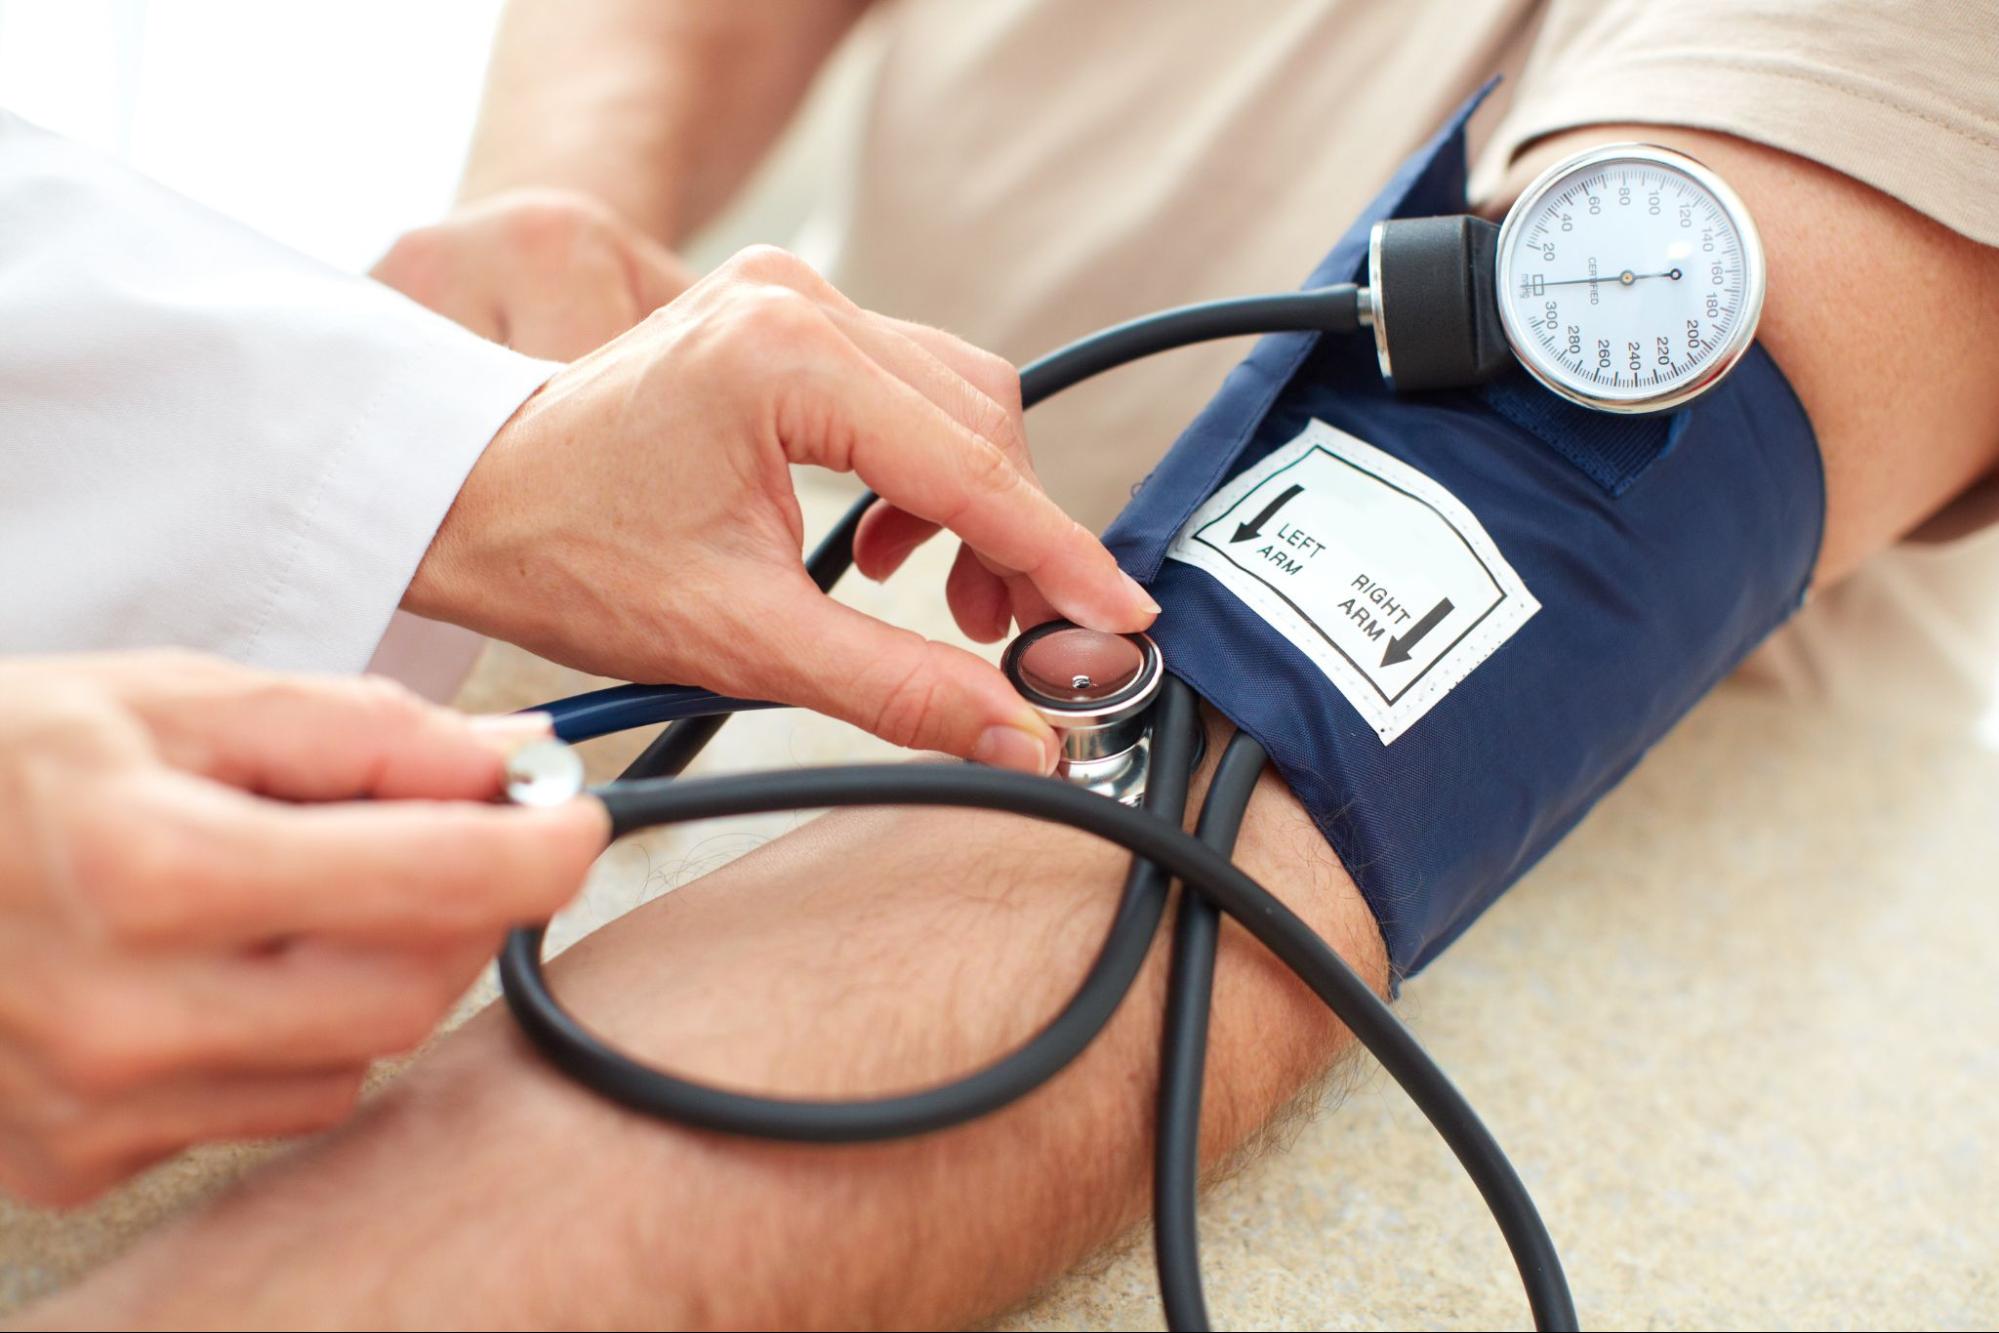 thumping in ear: doctor checking the patients blood pressure